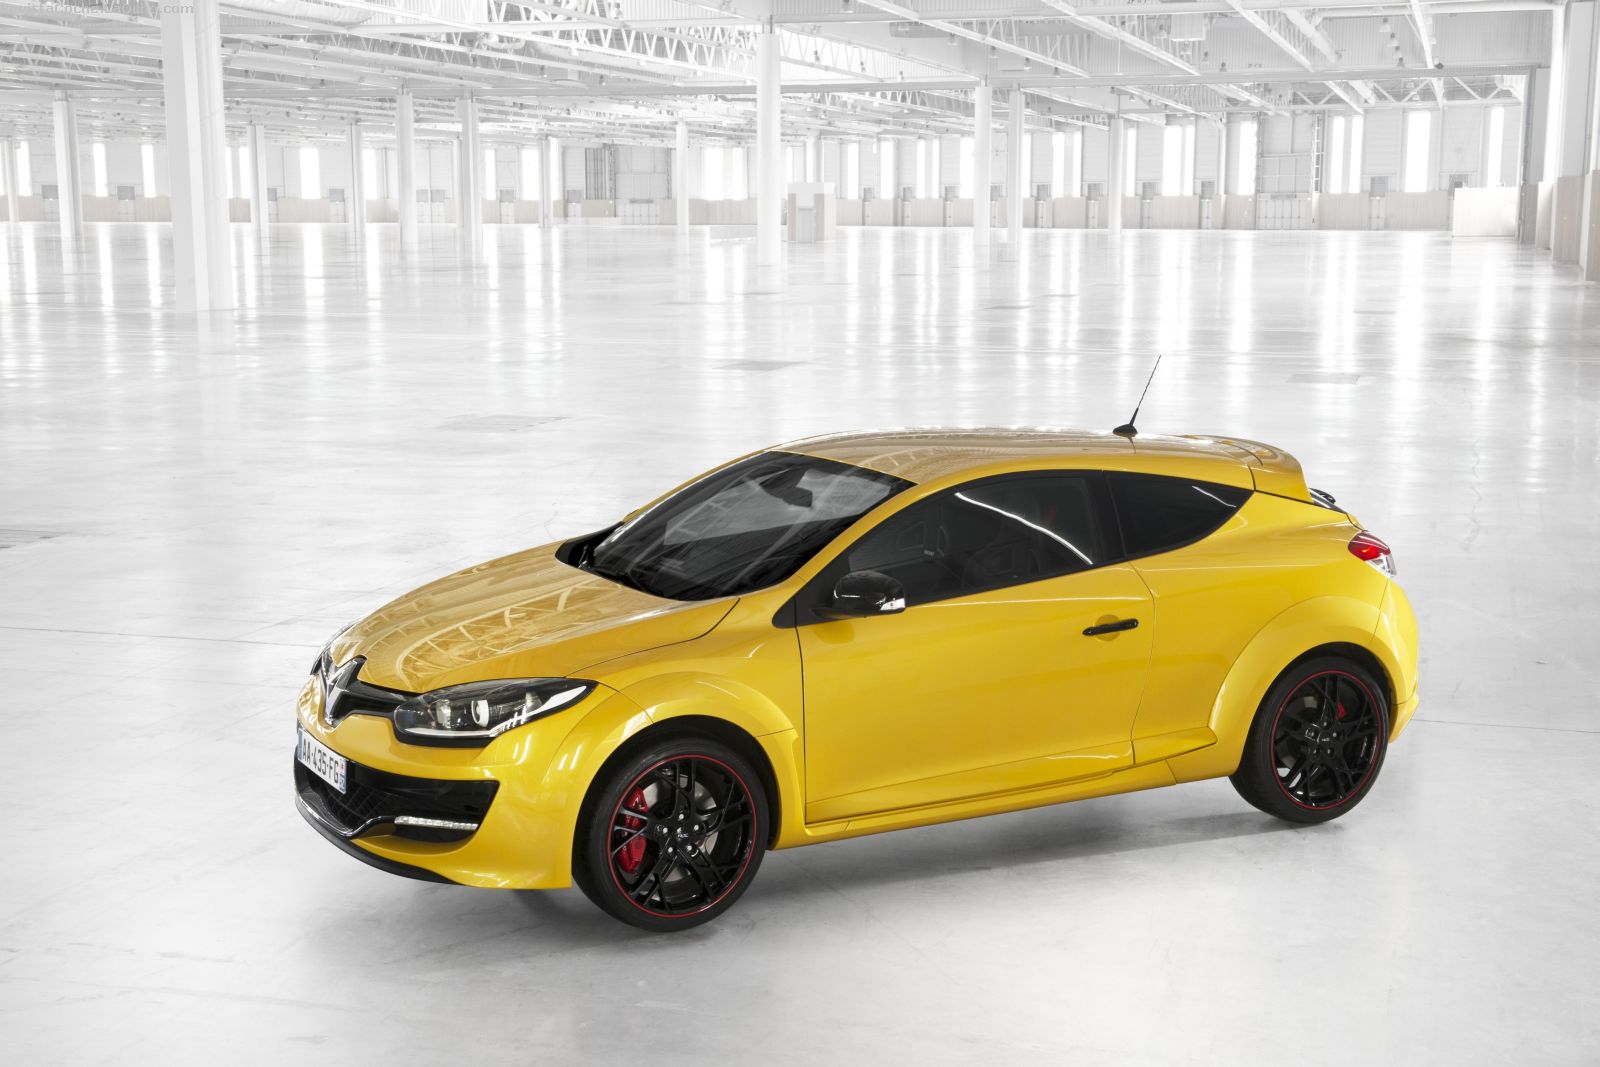 Images of 2014 Renault Mégane RS | 1600x1067